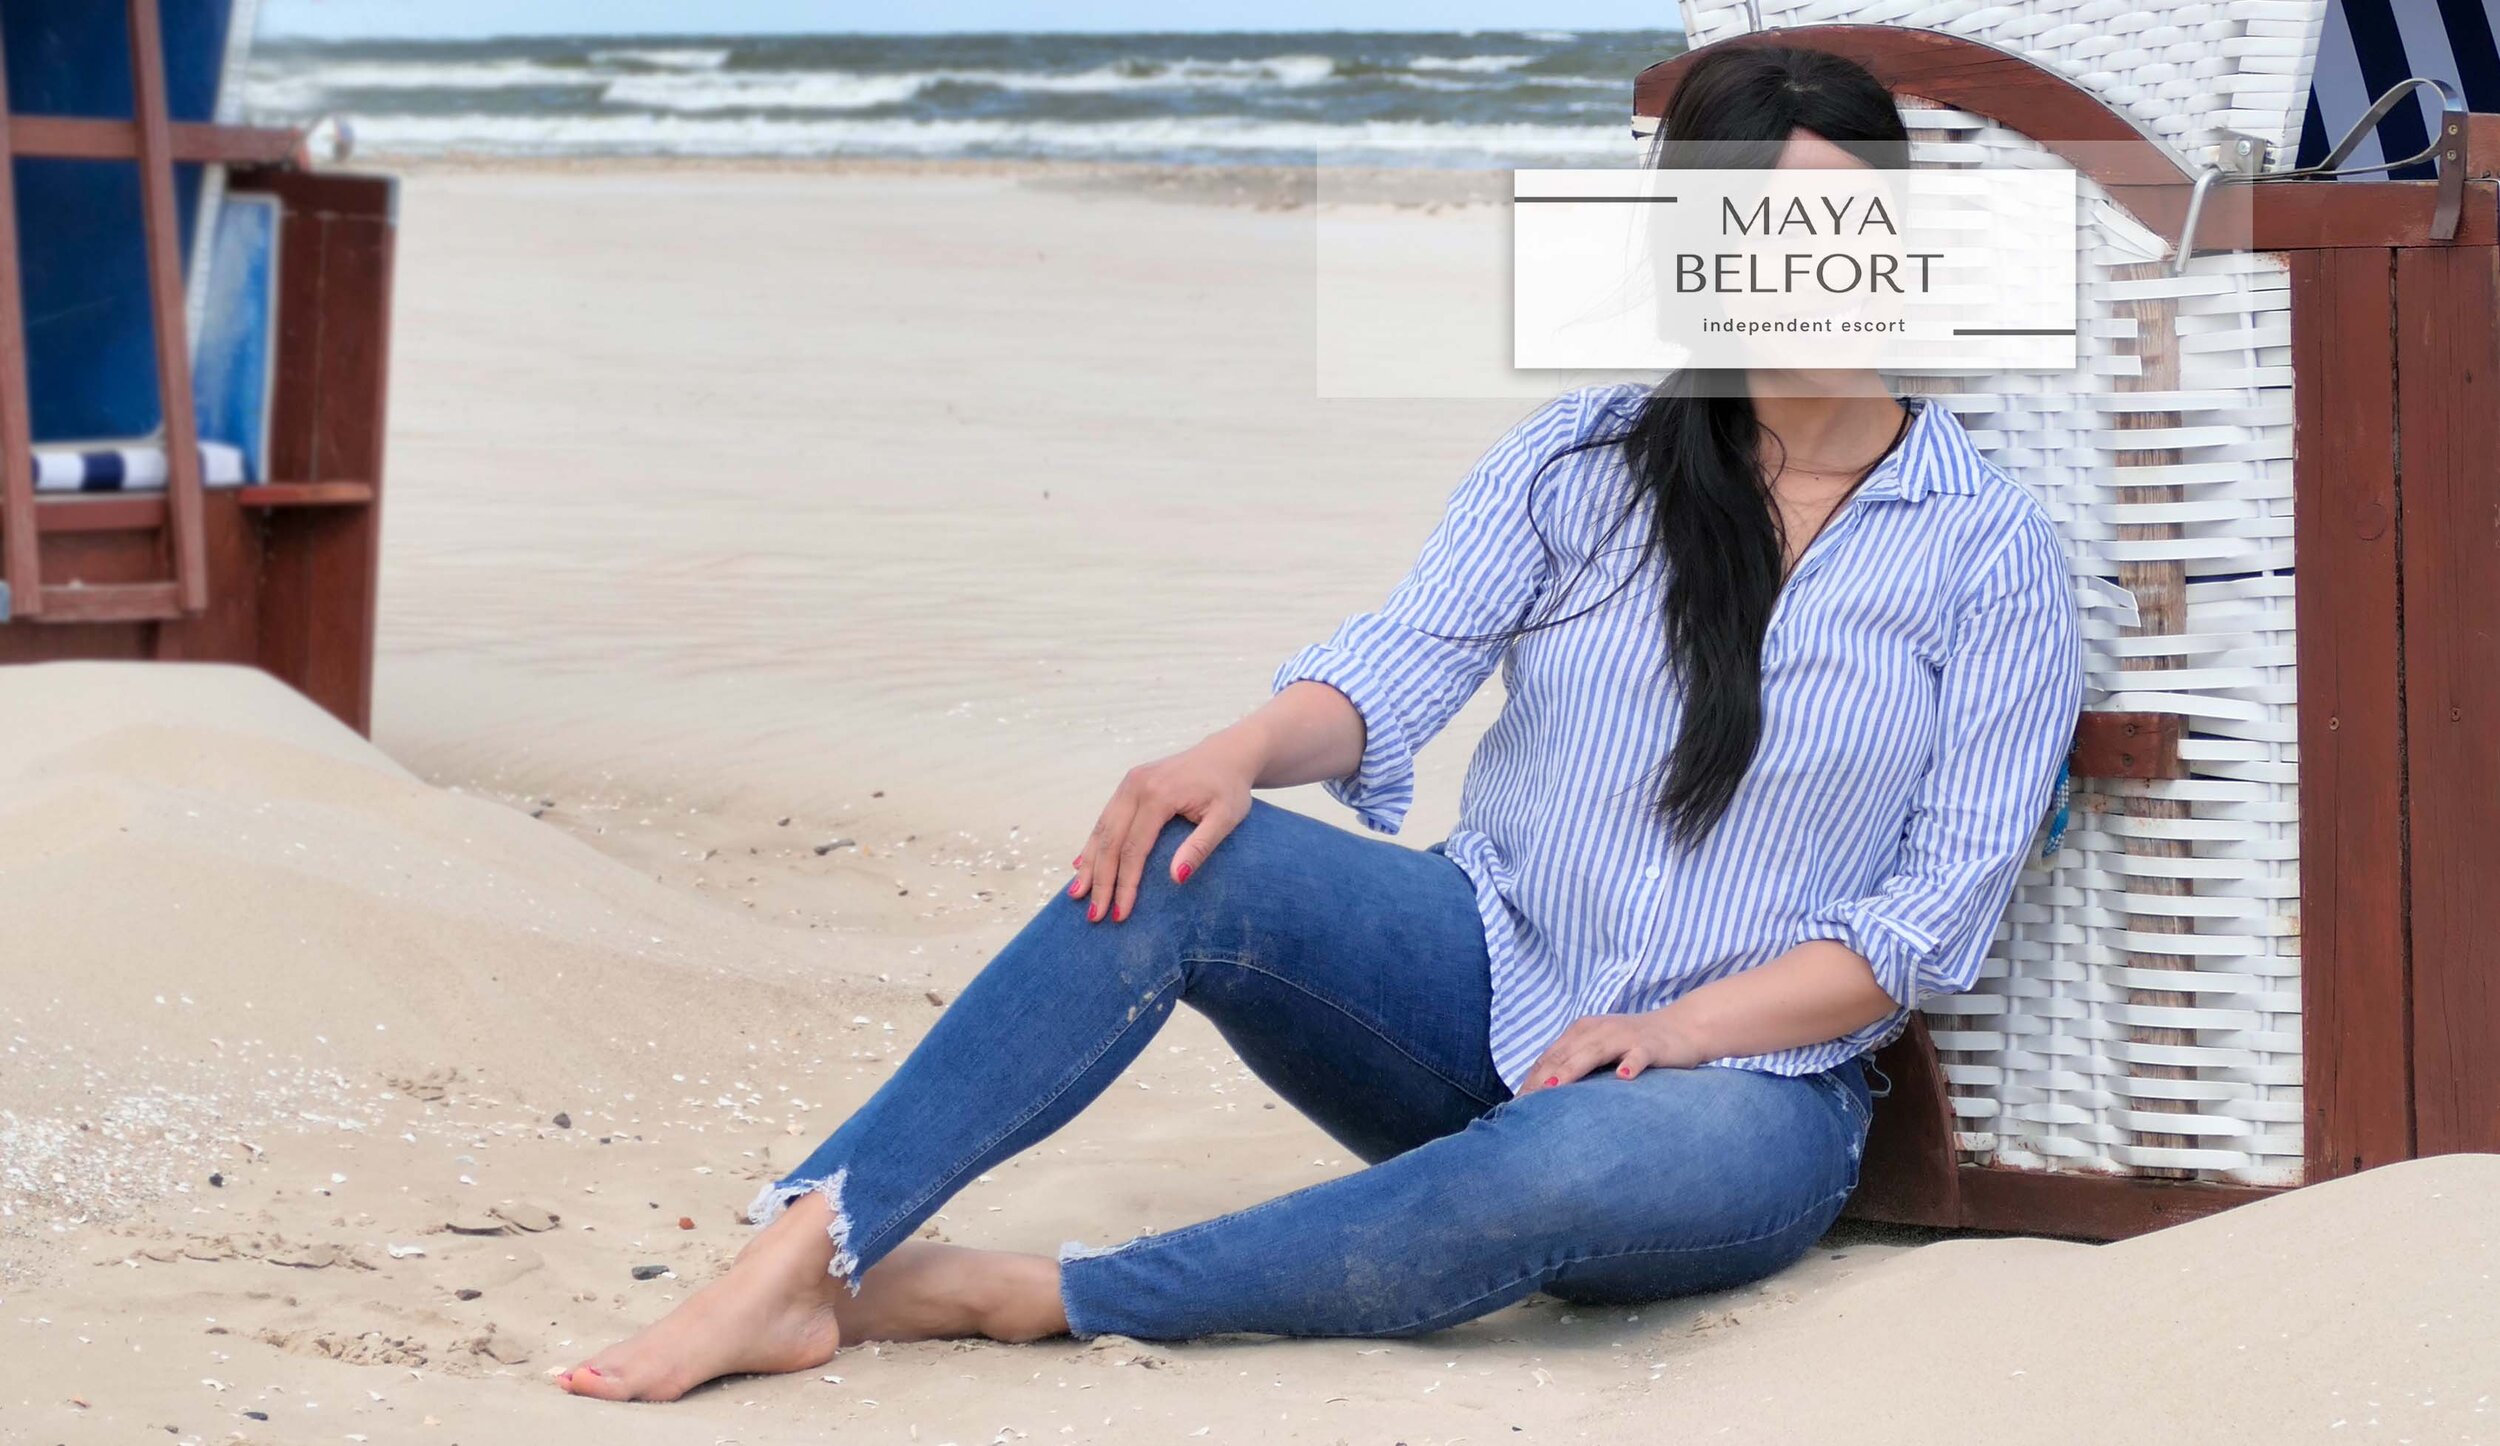 Escort travel companion in Germany and all over the world. In the picture you can see Maya at the seaside at a beach chair.